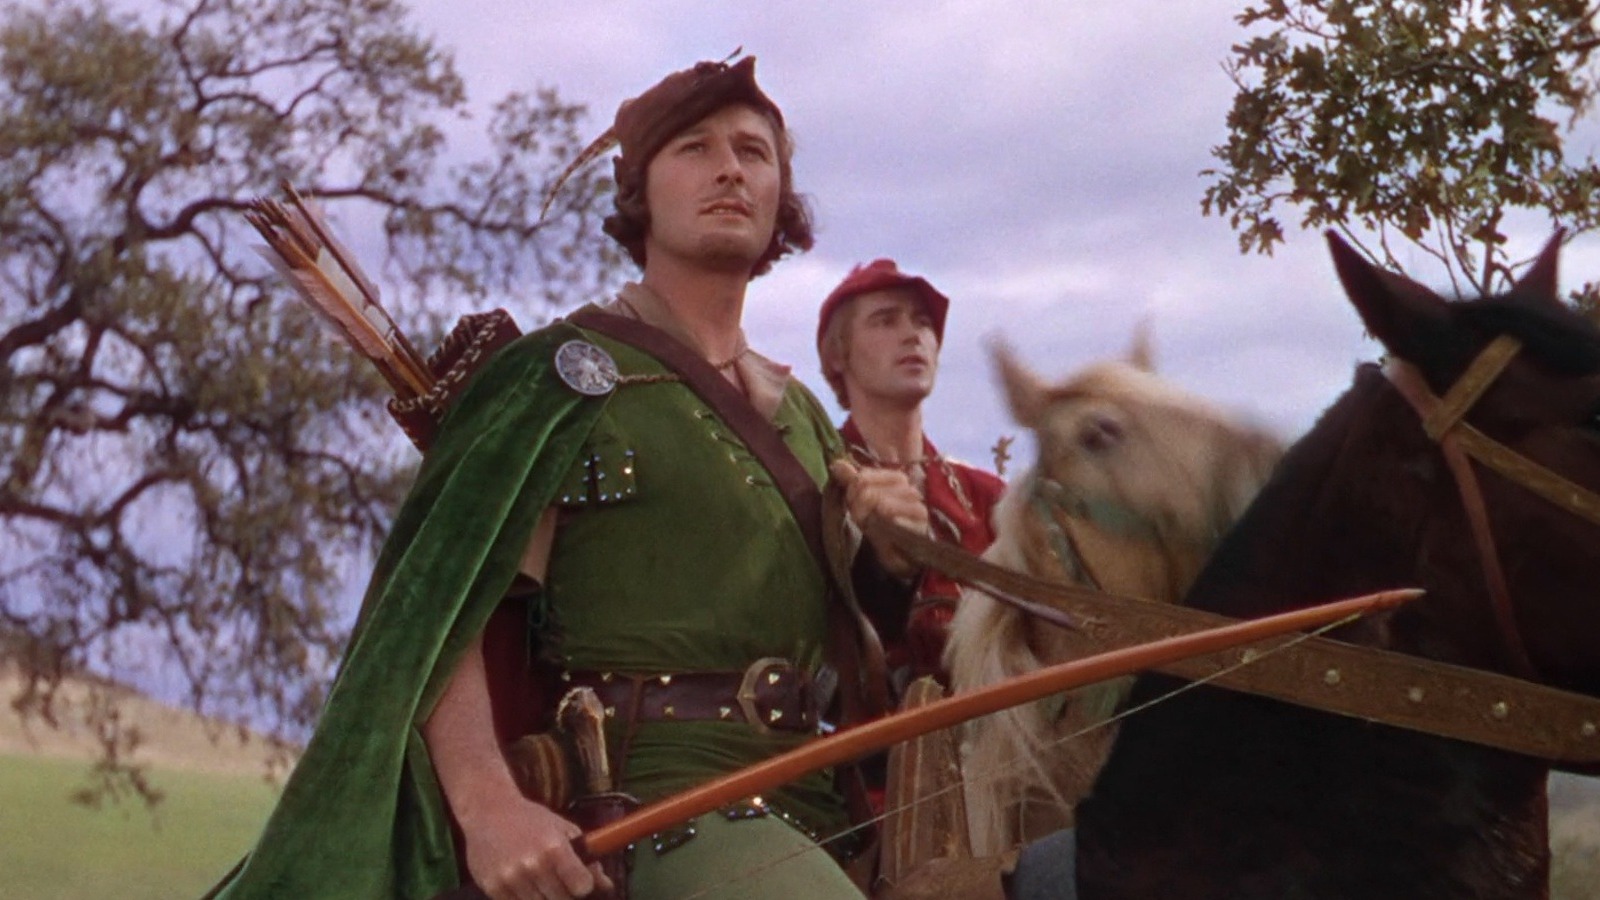 Robin Hood Is Getting Reimagined As A Modern Hip-Hop Series From Hotline Bling Director